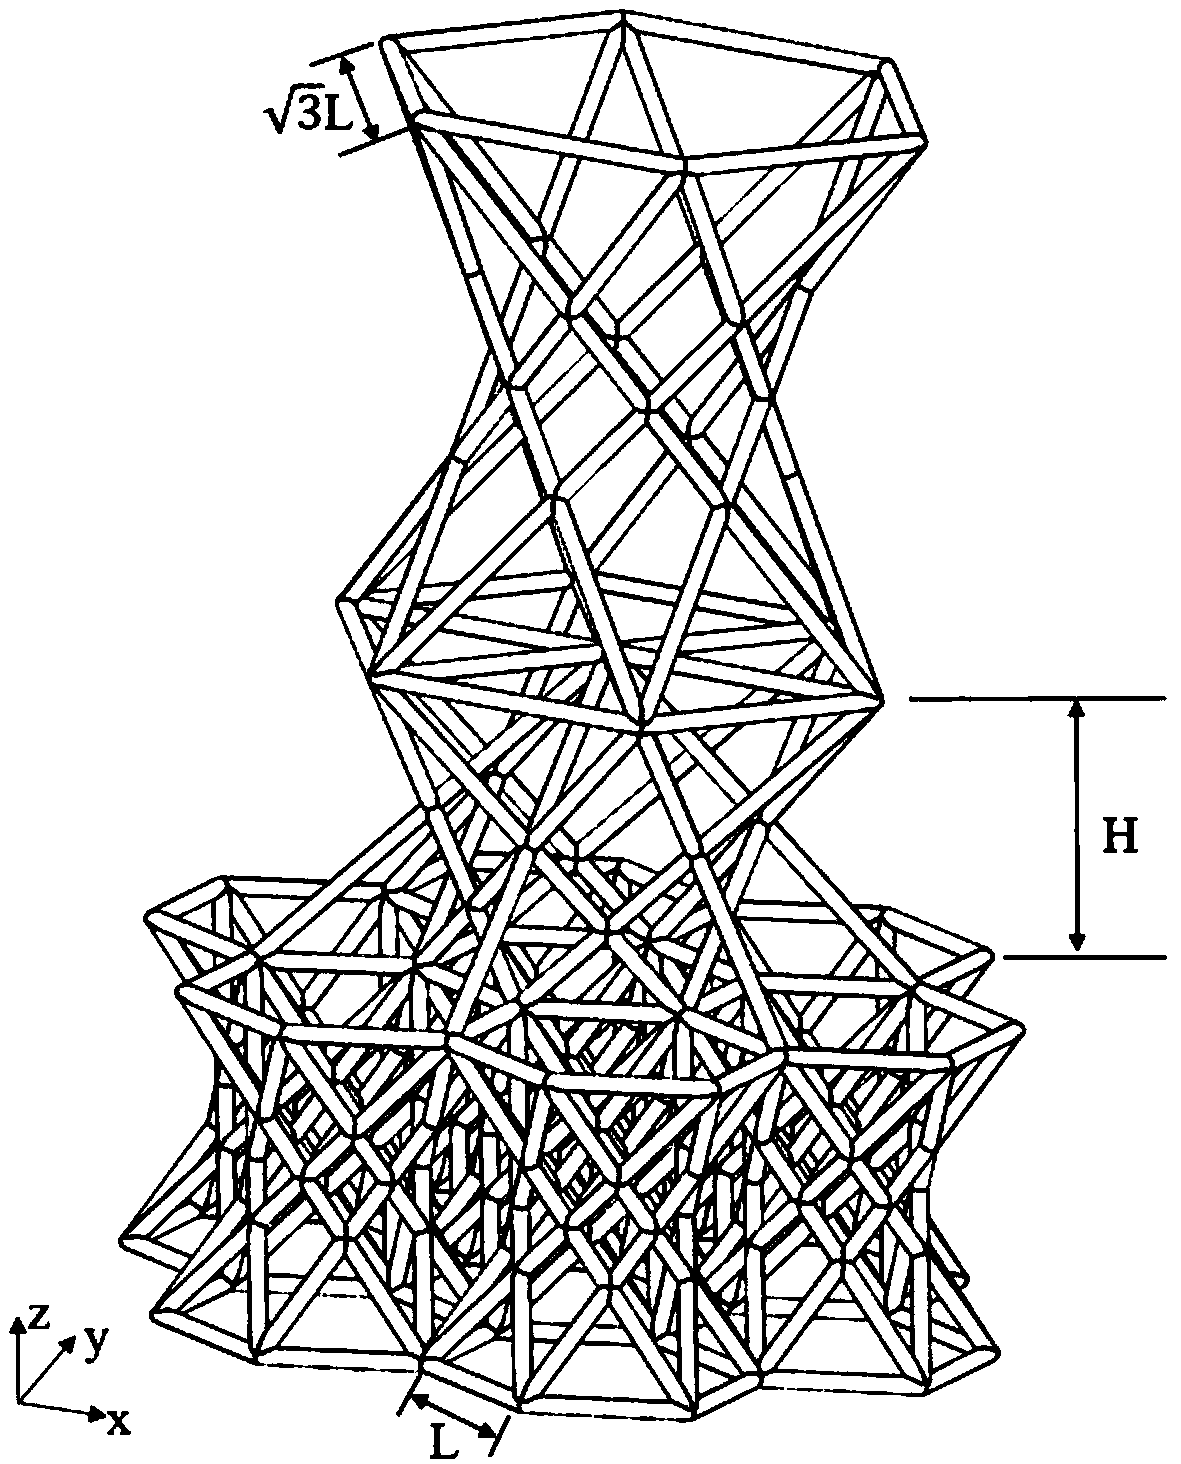 Variable unit cell size gradient lattice structure with transition layers